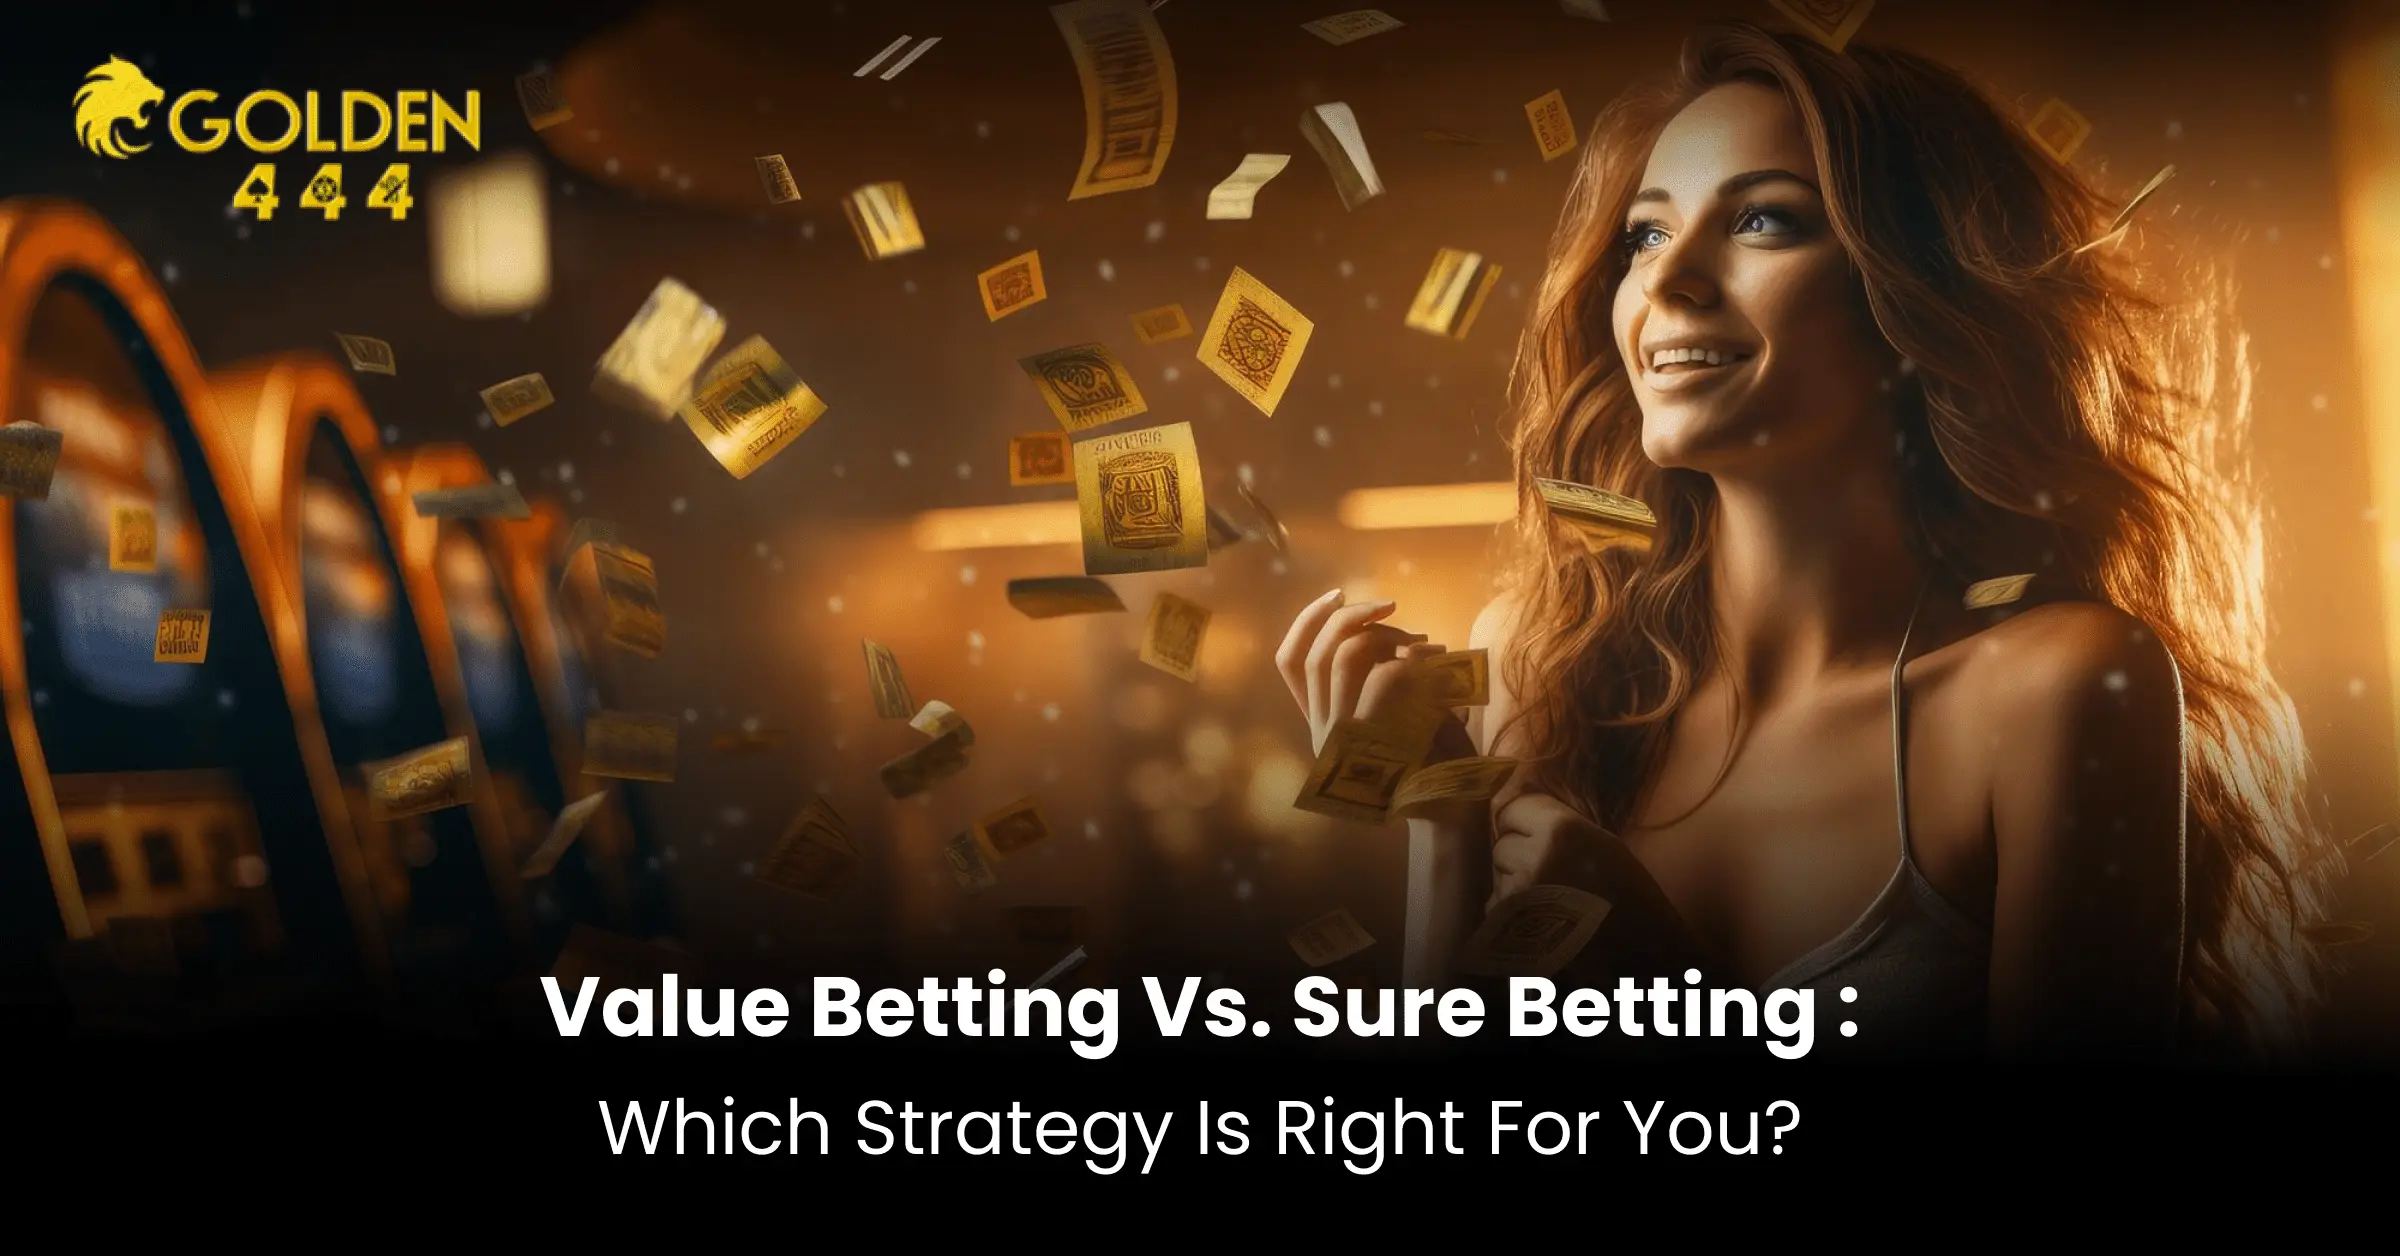 Value Betting vs. Sure Betting: Which Strategy is Right for You?